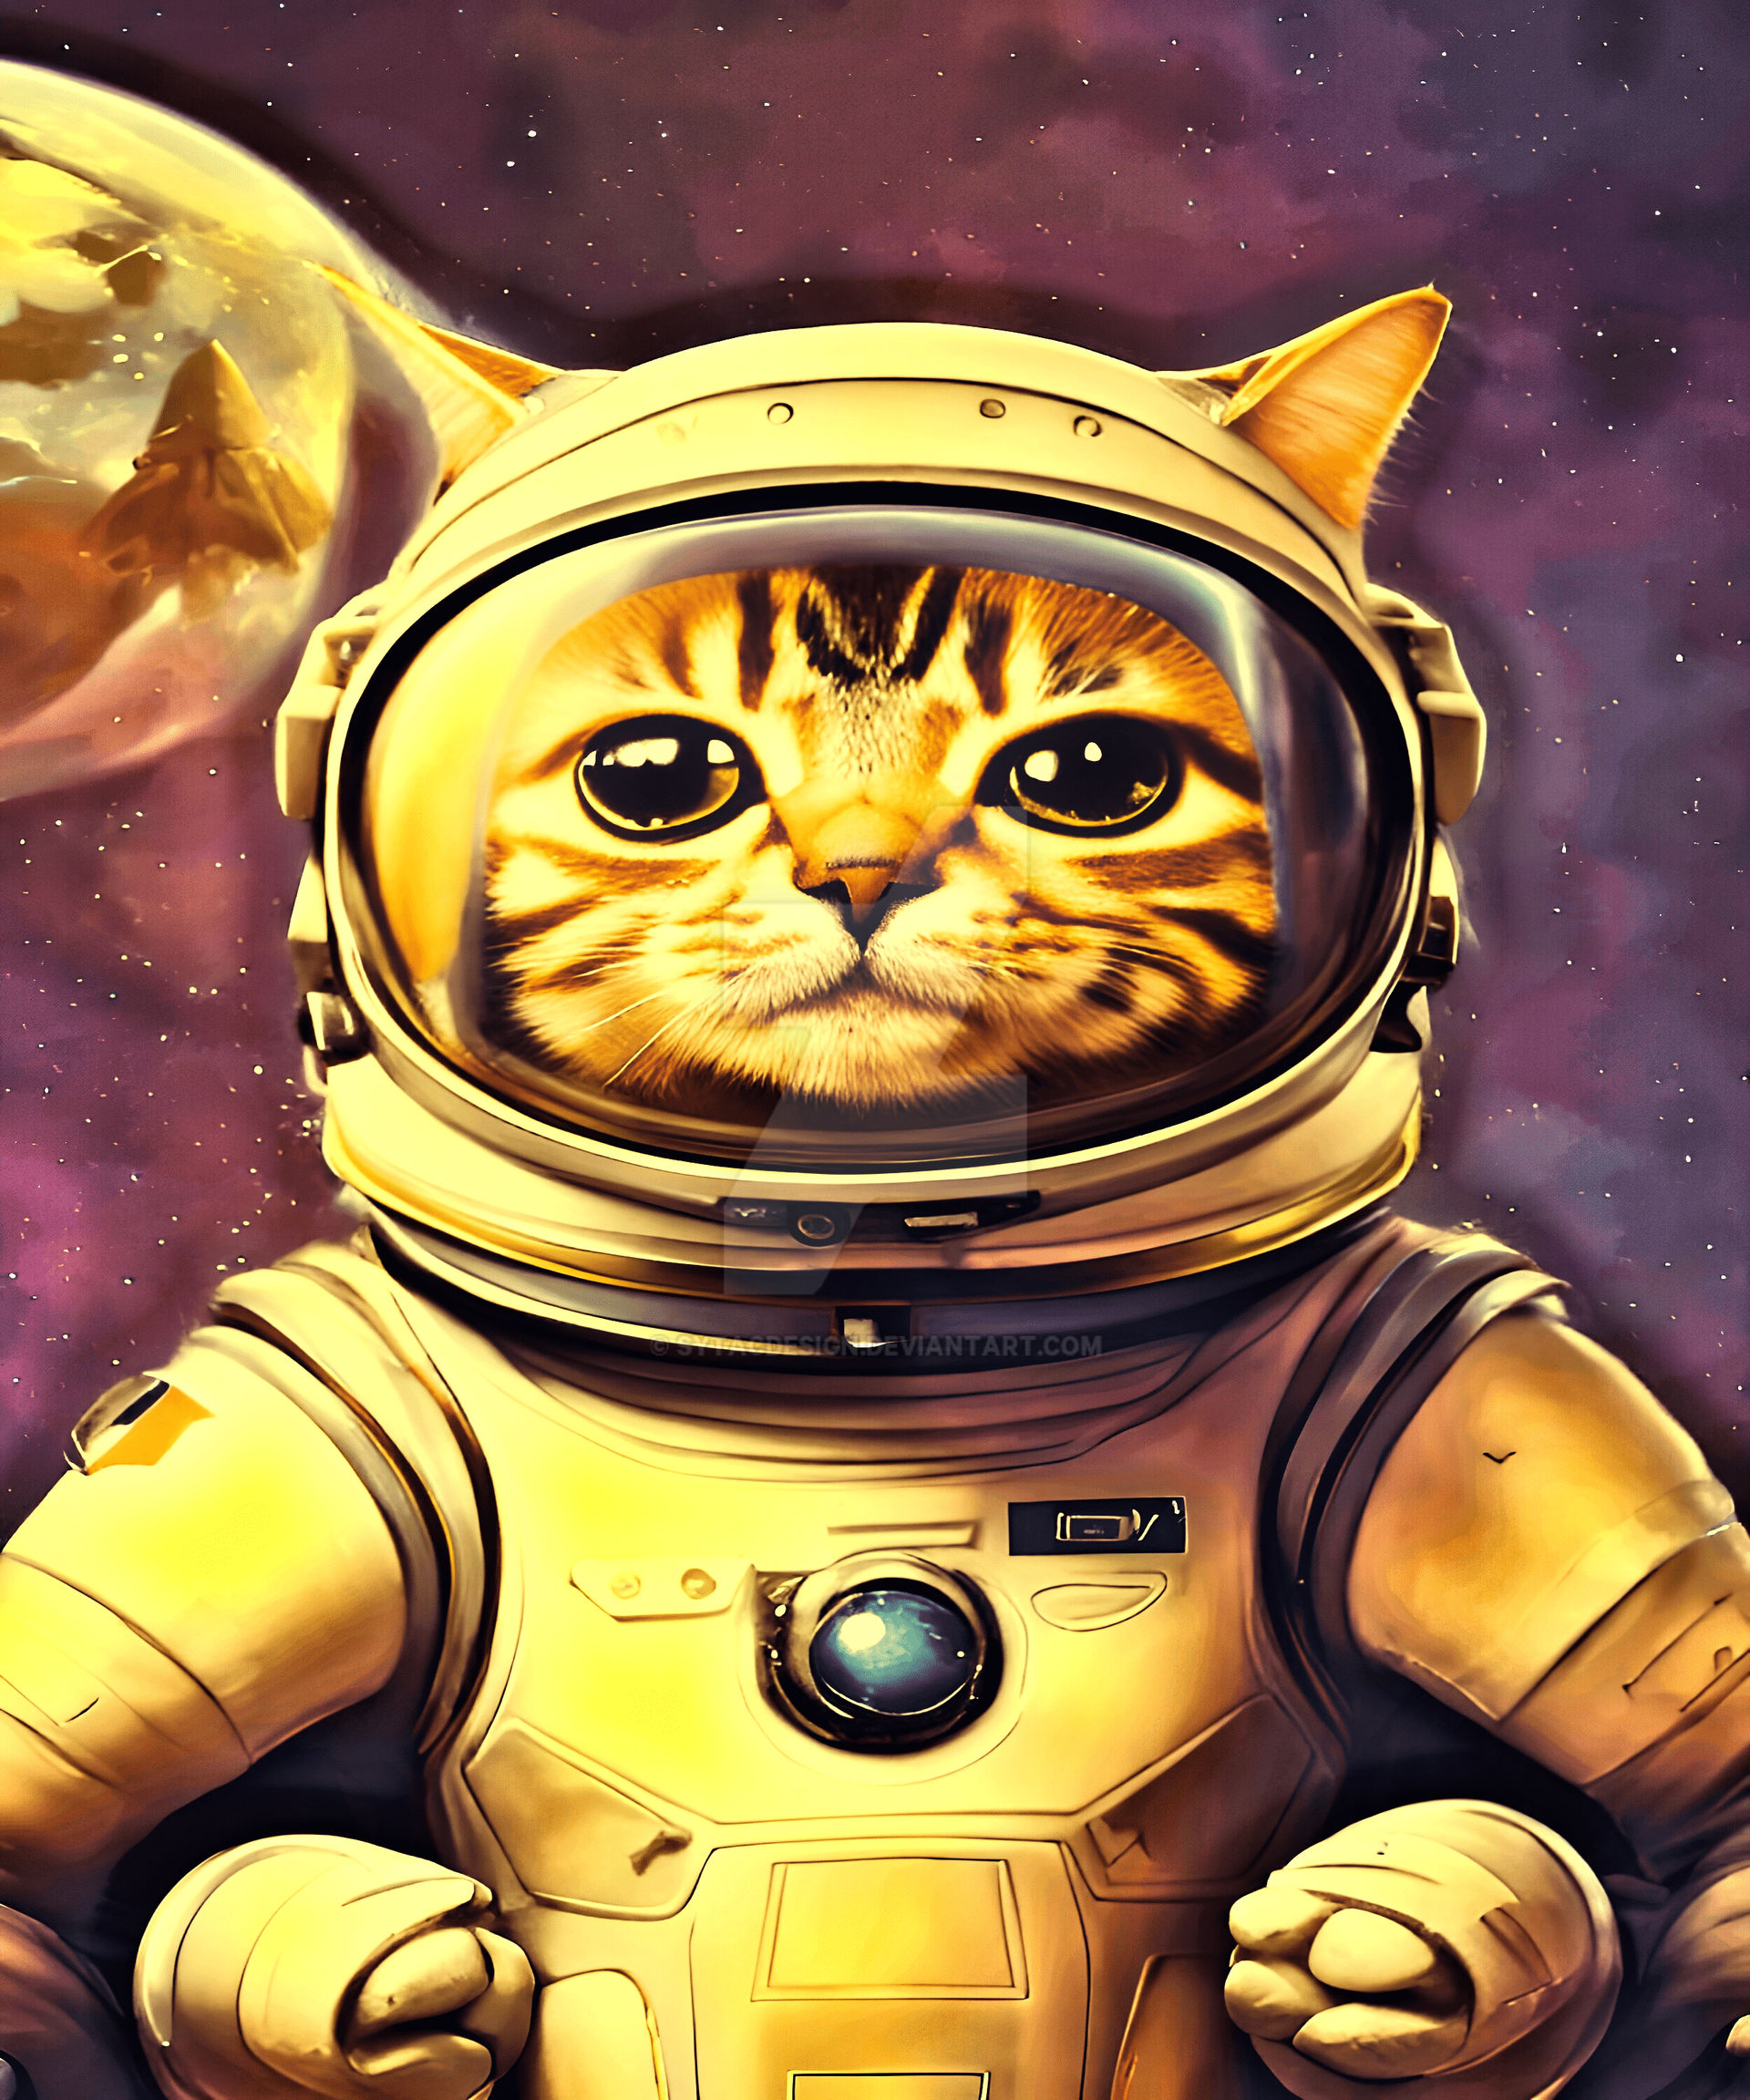 animals Cats Space Astronaut Cat Funny by sytacdesign on DeviantArt